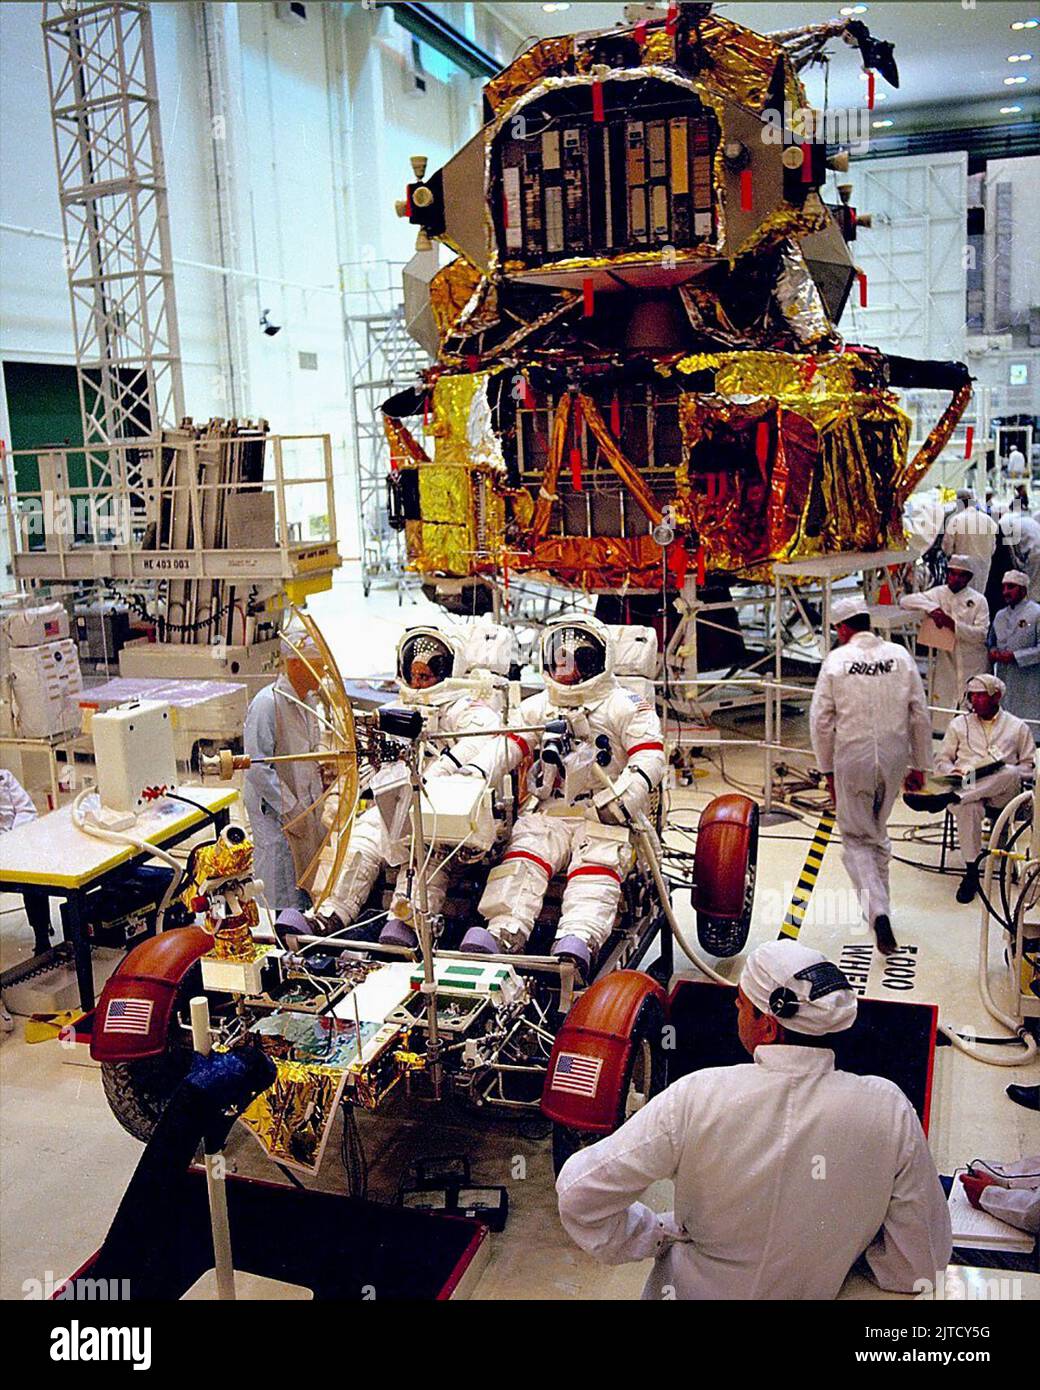 APOLLO MISSION PREPERATIONS, IN THE SHADOW OF THE MOON, 2007 Stock Photo